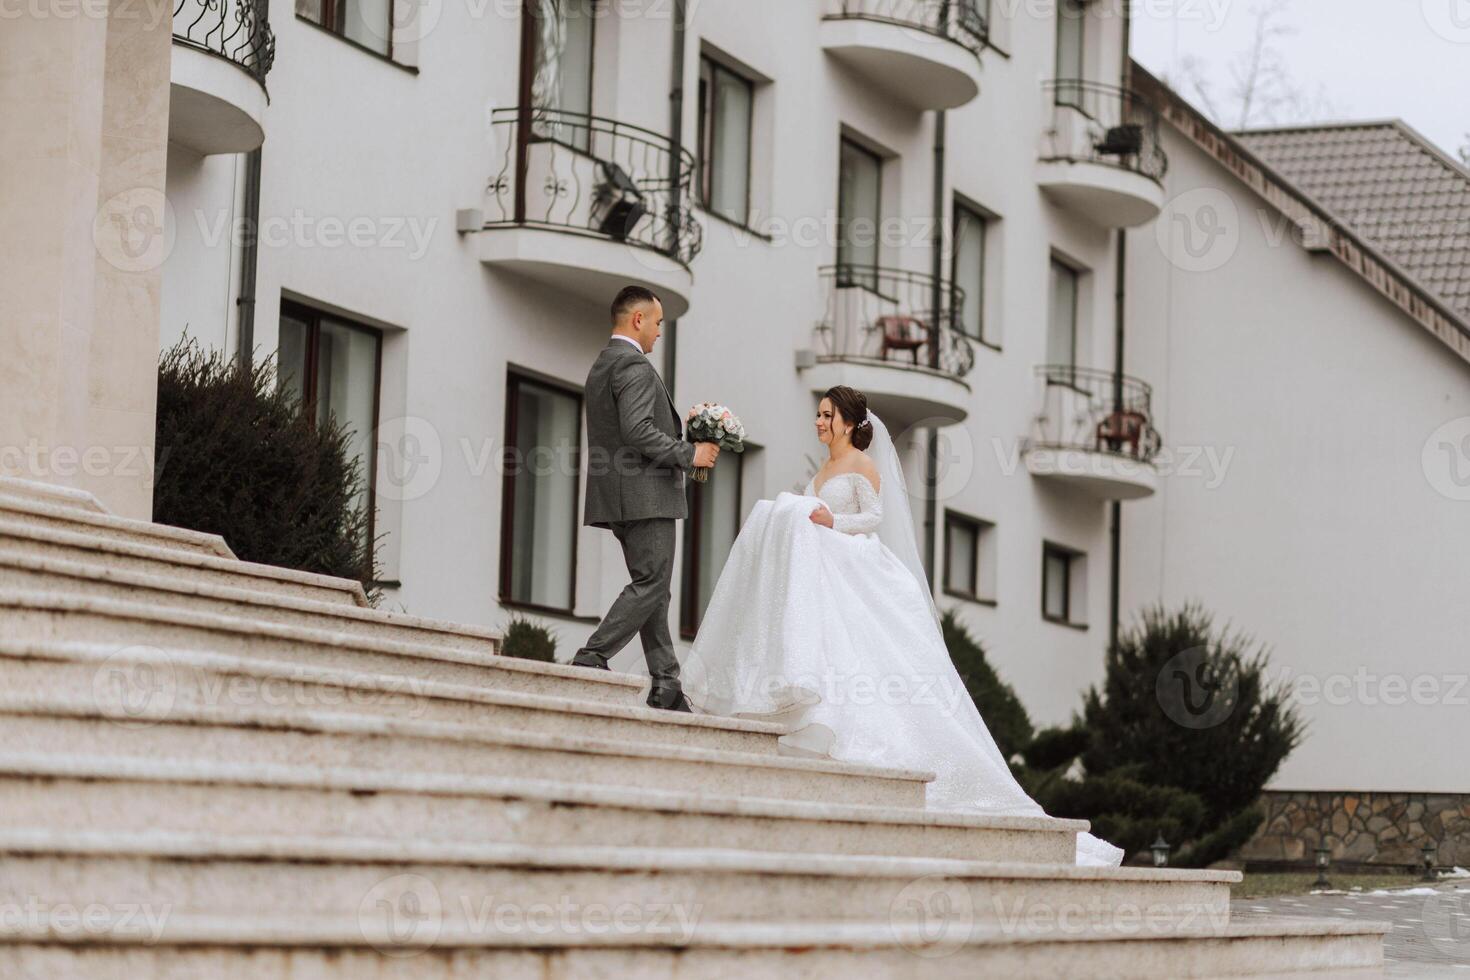 A bride in a white dress with a train and a groom in a suit pose on the steps of a building. Wedding photo session in nature